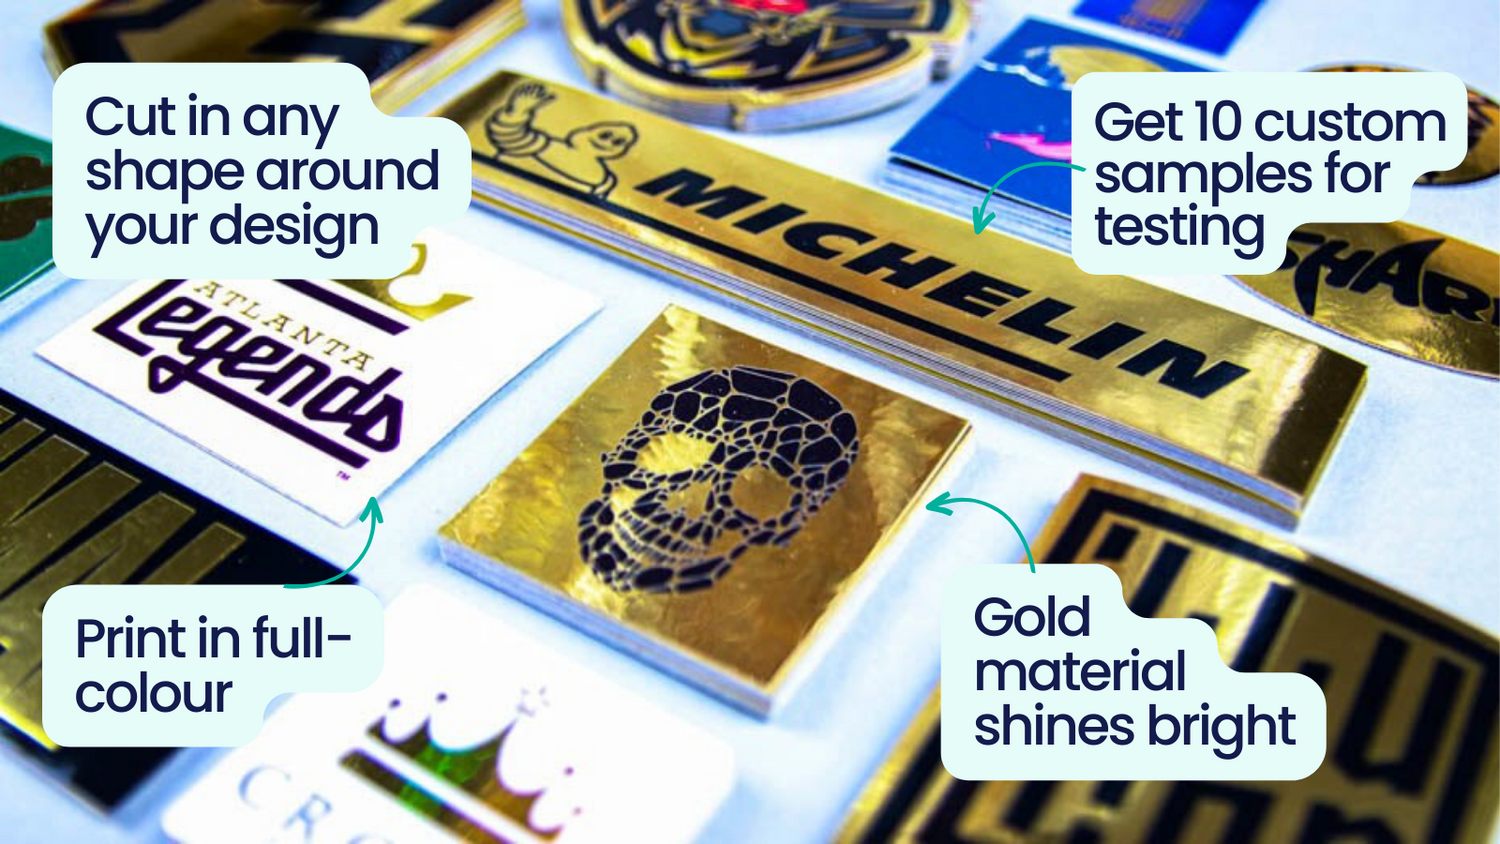 What are mirror gold samples